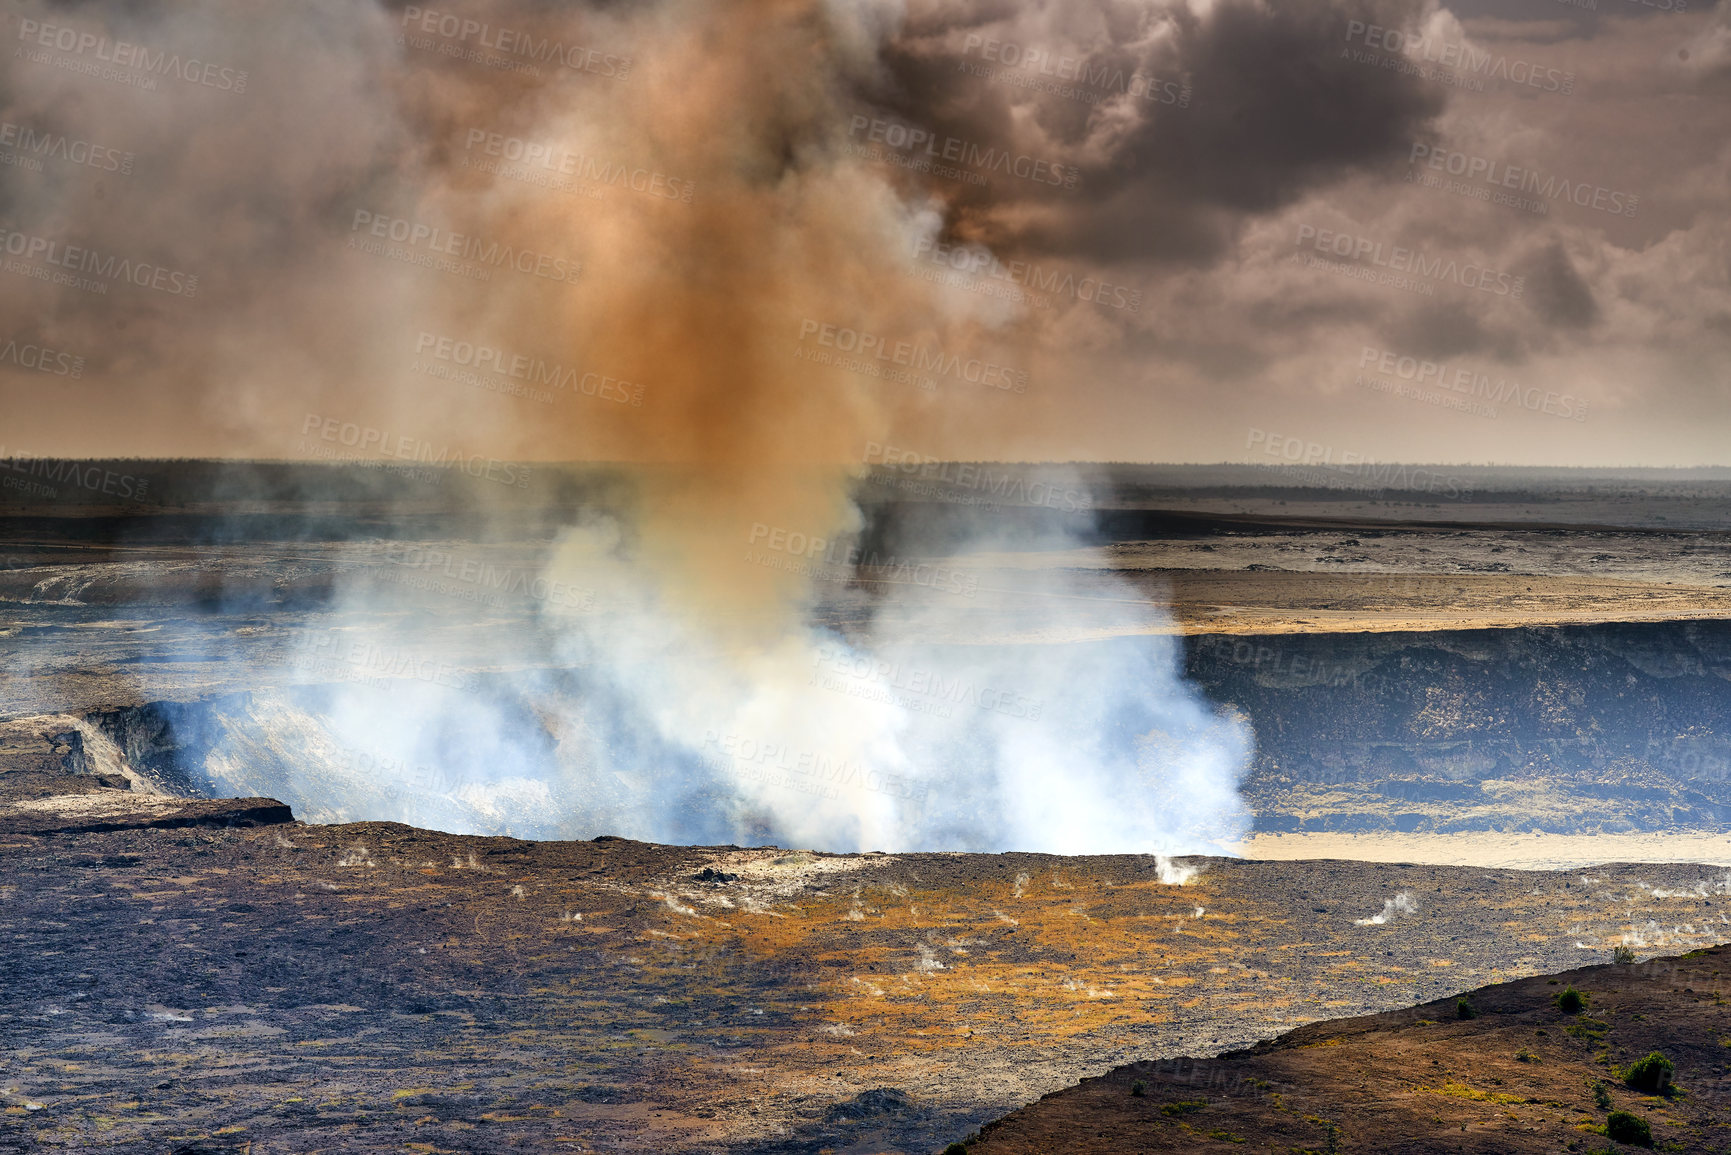 Buy stock photo Mouna Kea most active volcano on a cloudy day. Extreme panoramic landscape of Hawaiian mountains and rocky surface. Overcast skies with a steaming volcanic area. Smoke coming out of crater